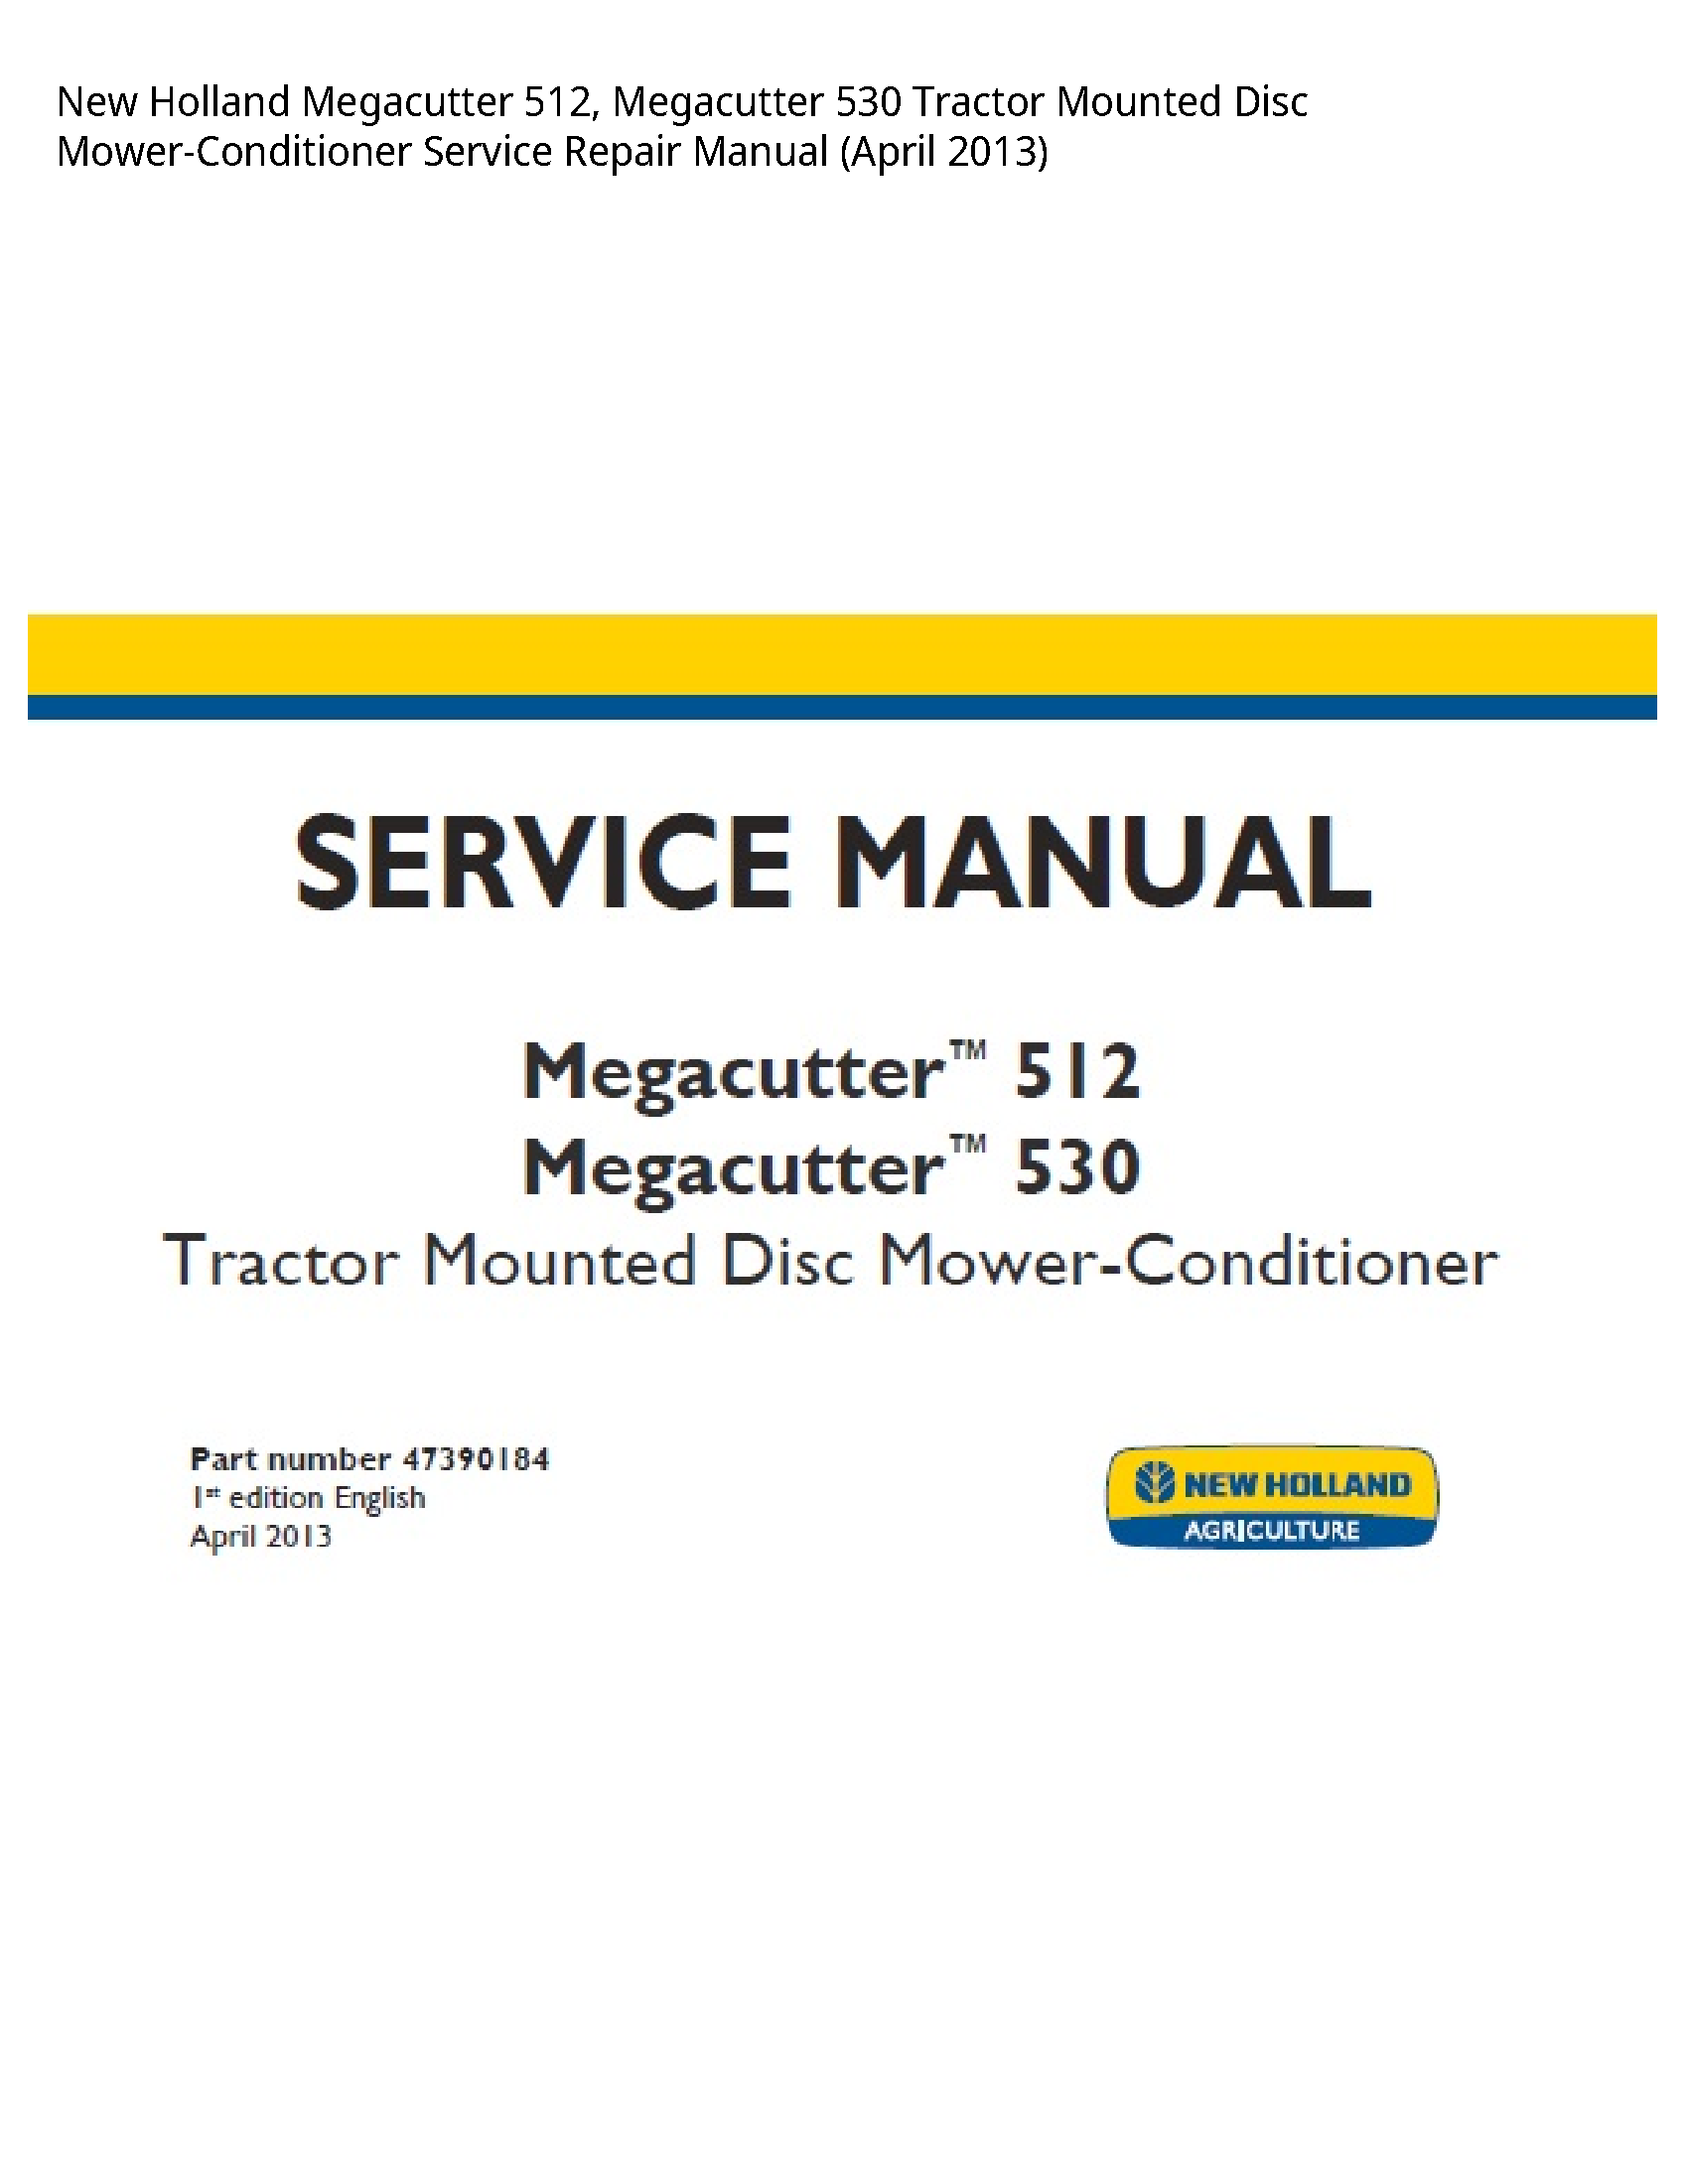 New Holland 512 Megacutter Megacutter Tractor Mounted Disc Mower-Conditioner manual